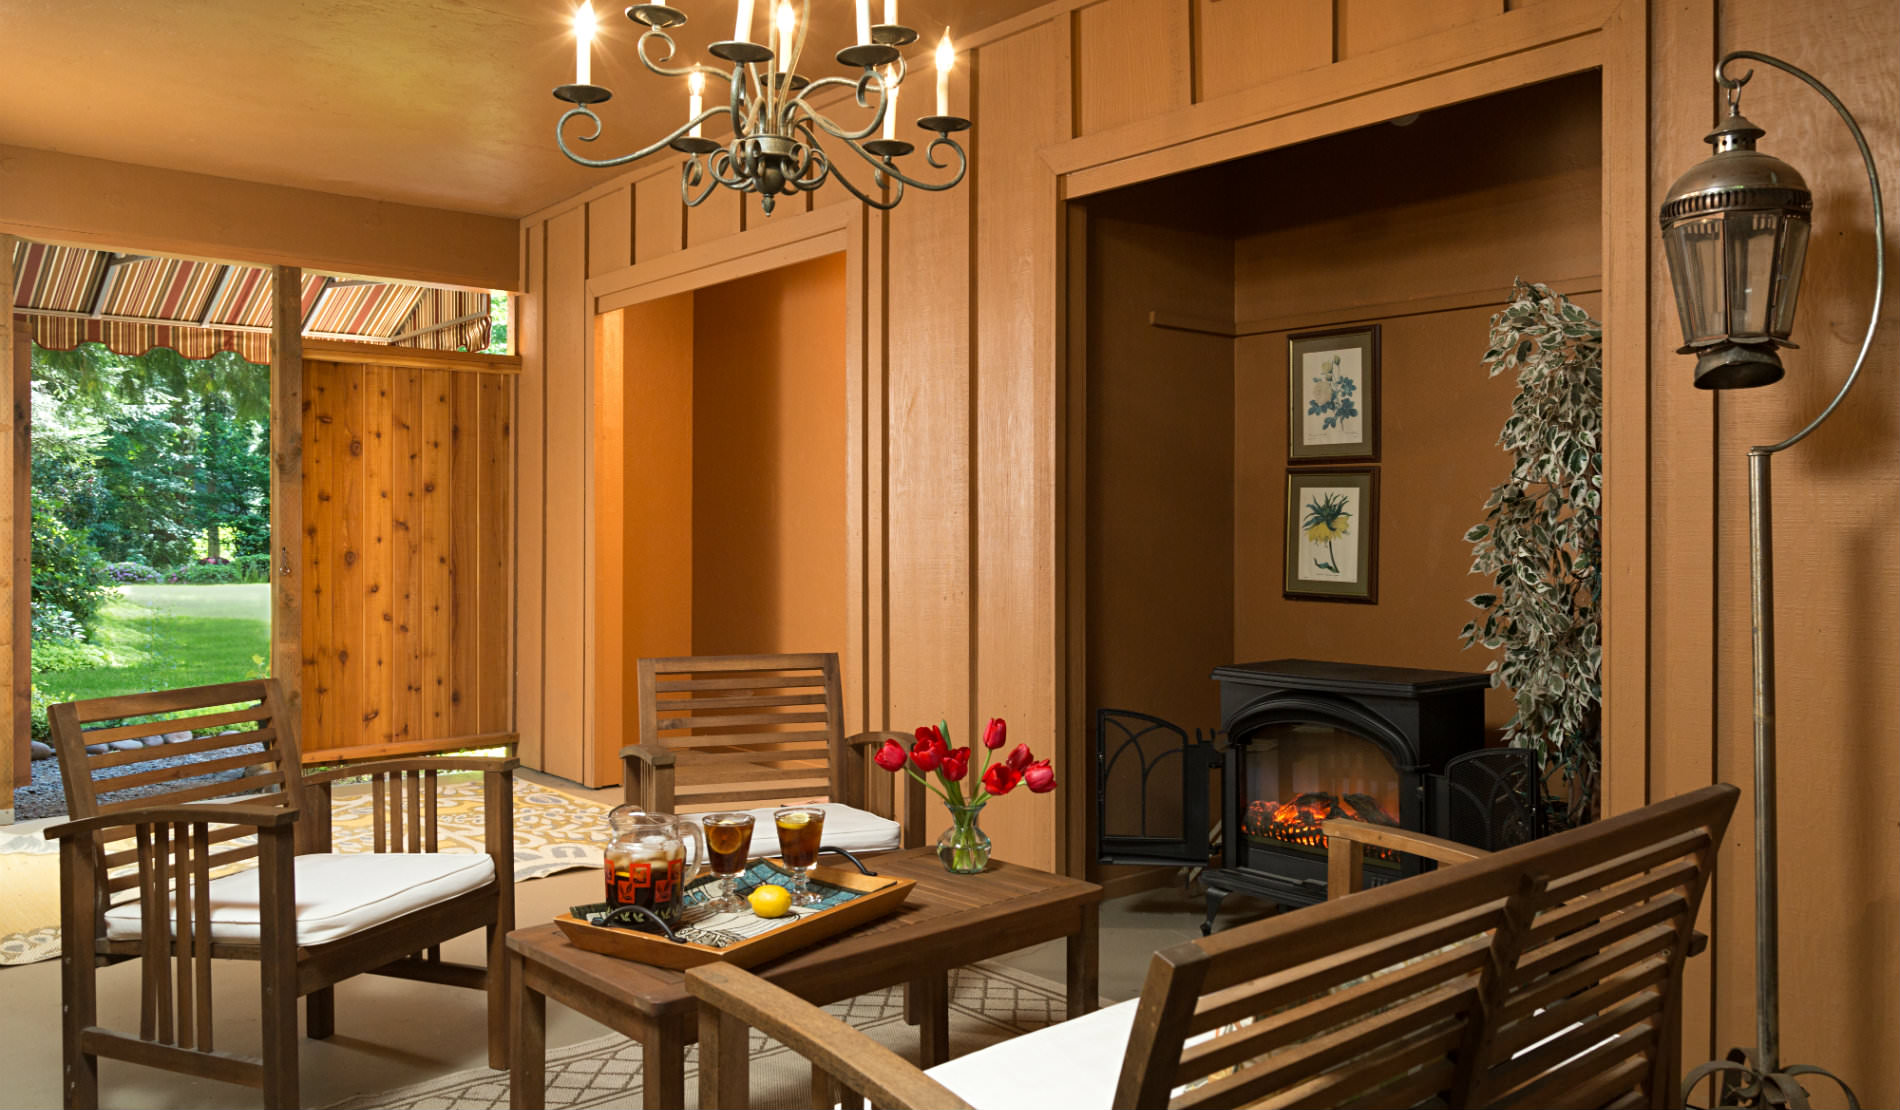 Wood Paneled room with wooden chairs and table set with cold drinks.